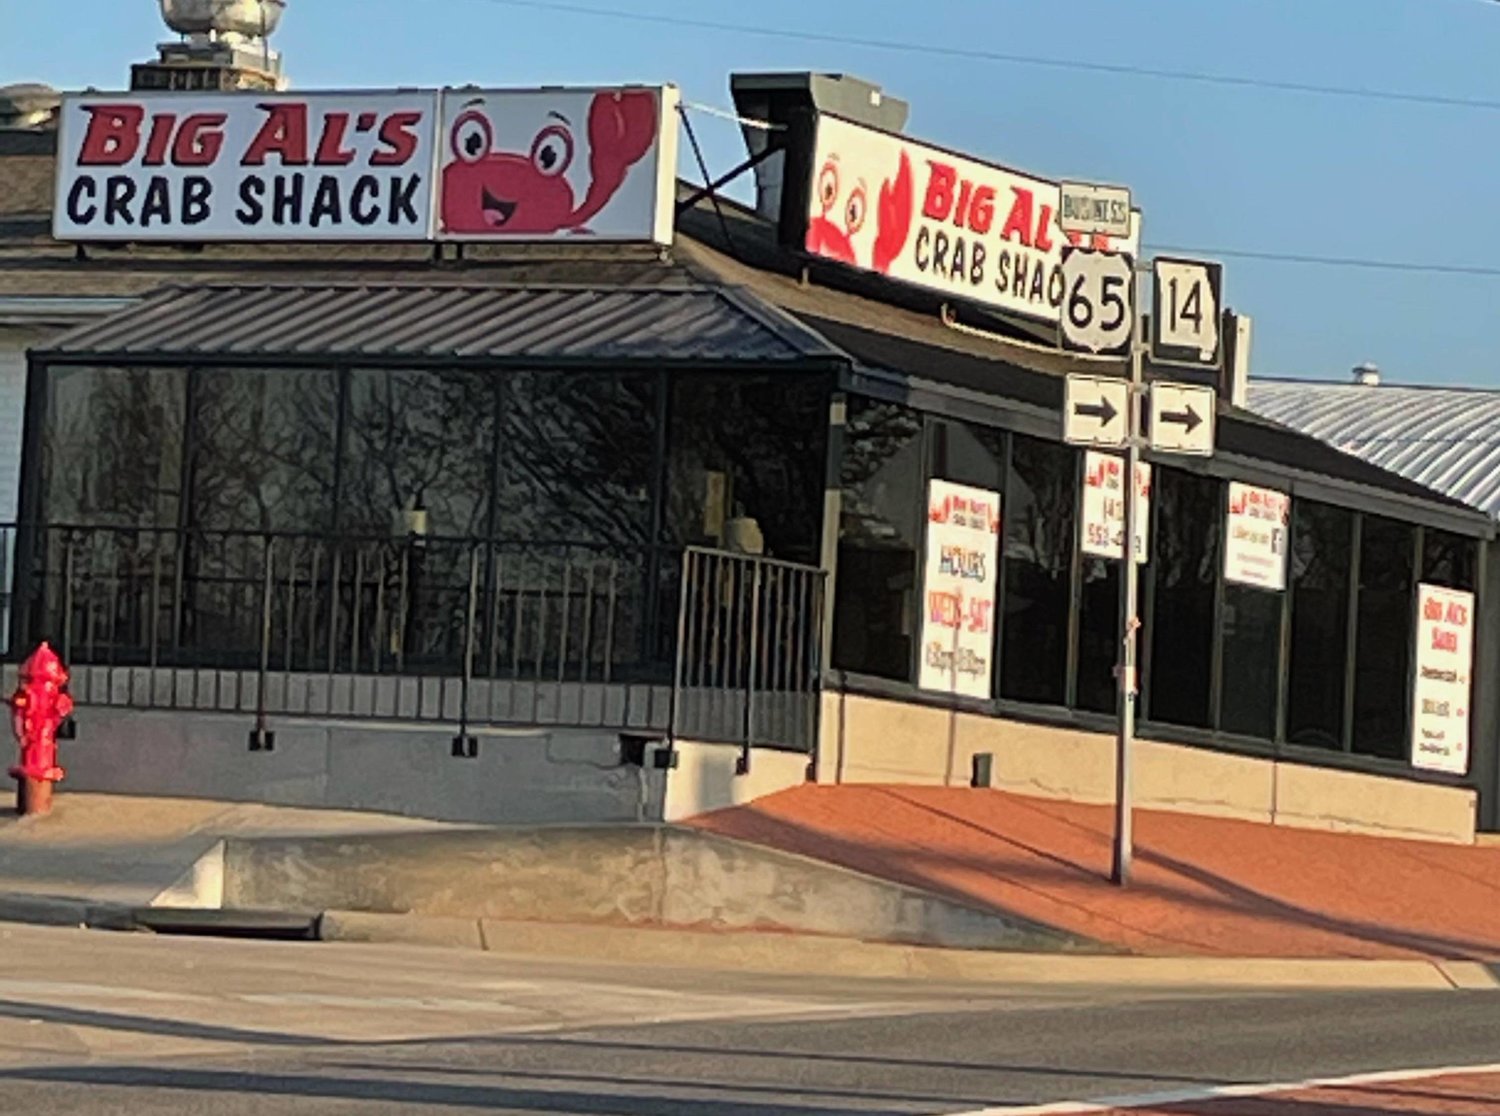 Big Al’s Crab Shack is set to open in Ozark this month.